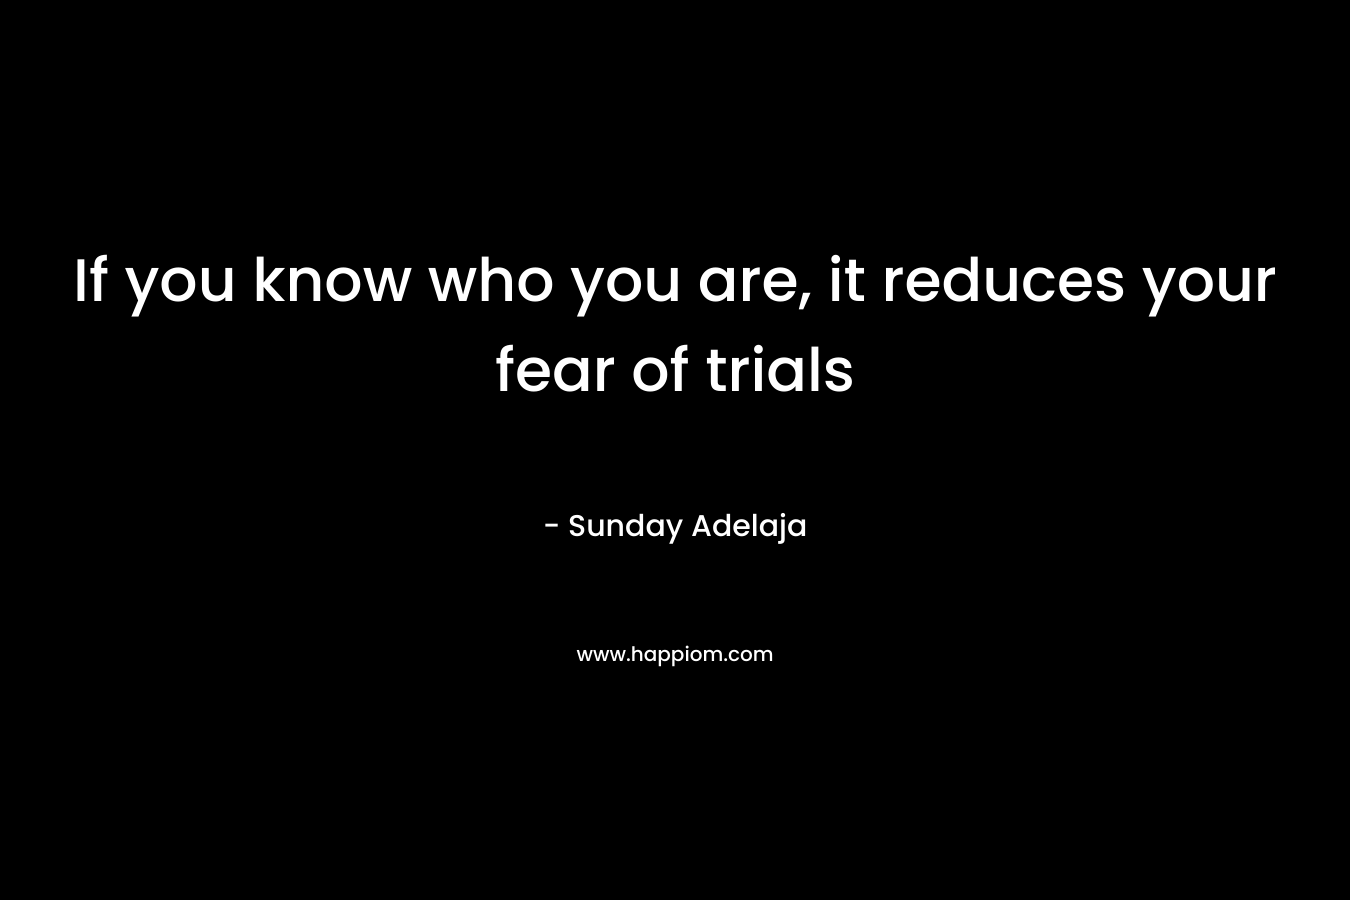 If you know who you are, it reduces your fear of trials